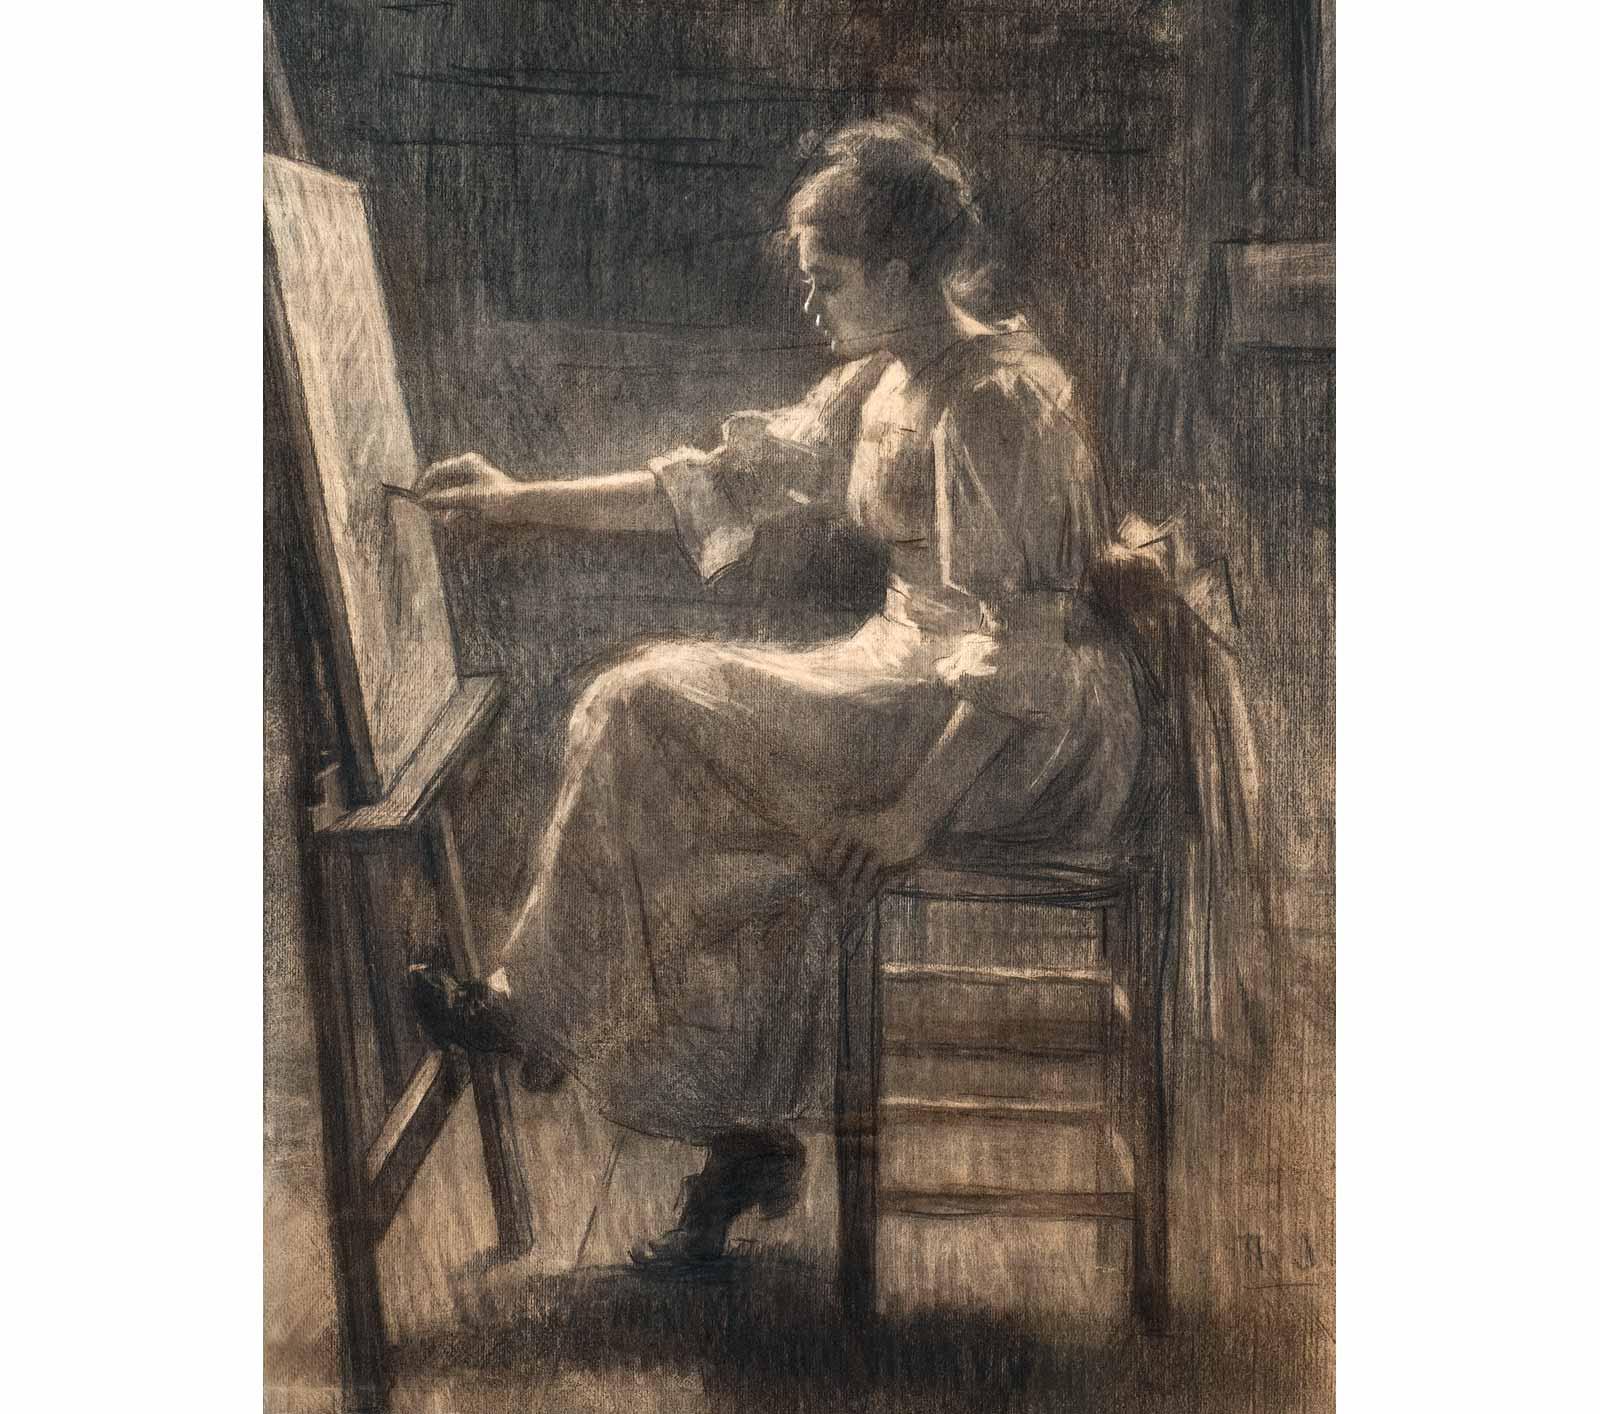 Thérèse Schwartze, ‘In the Studio’, representing the paintress Lizzy Ansingh, c. 1895.